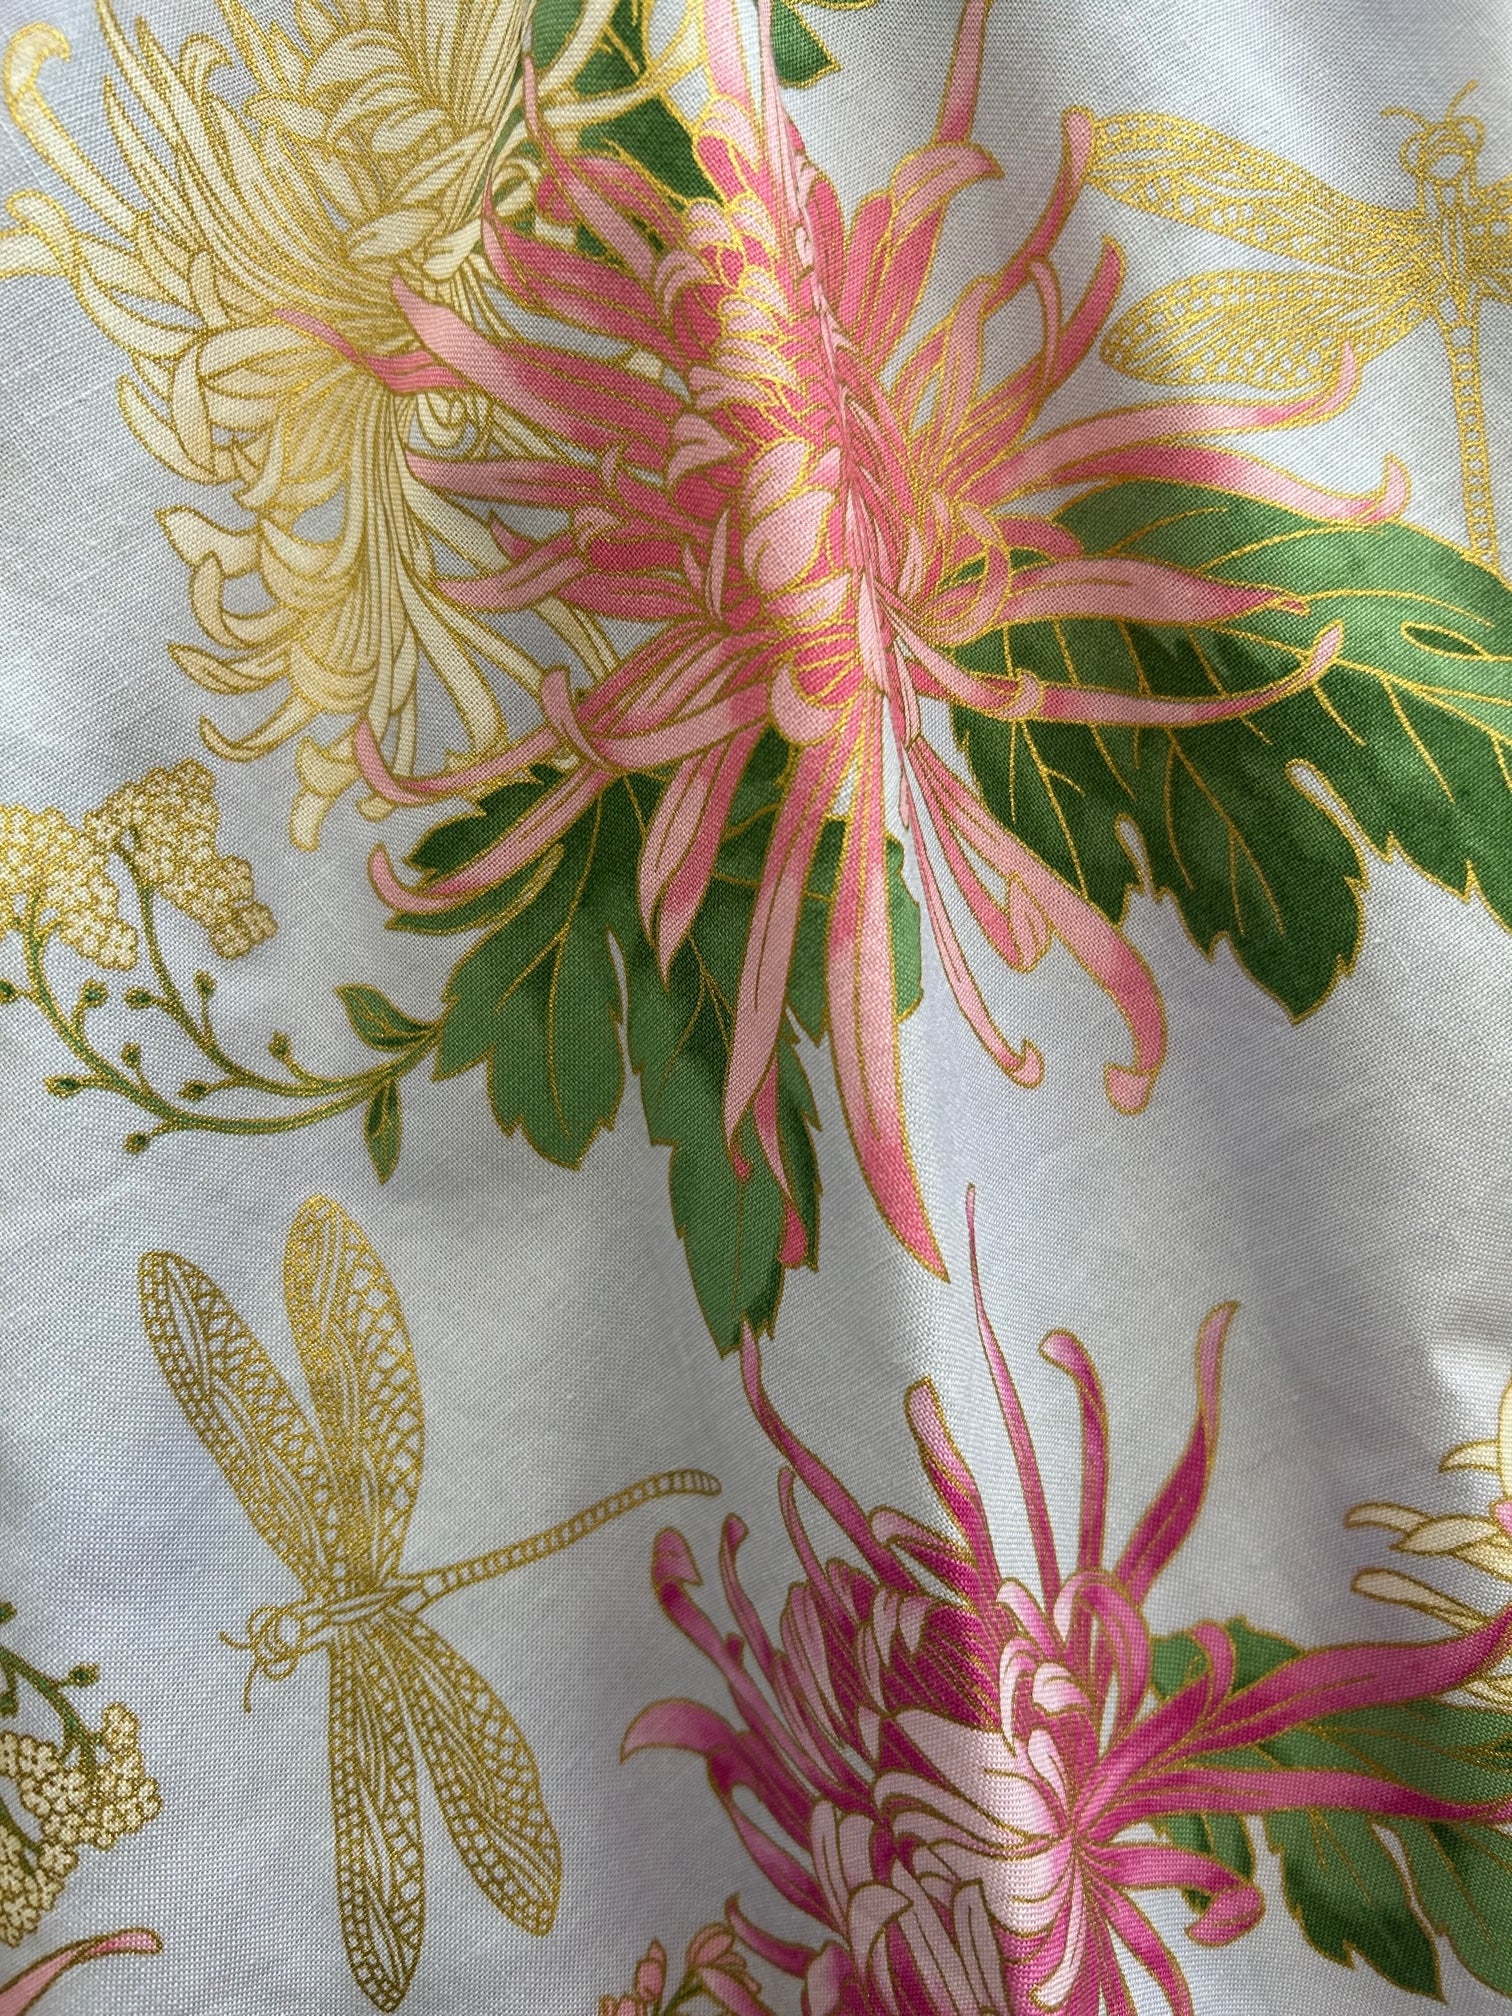 a close up of the fabric showing gold metallic details and gold metallic dragonflies